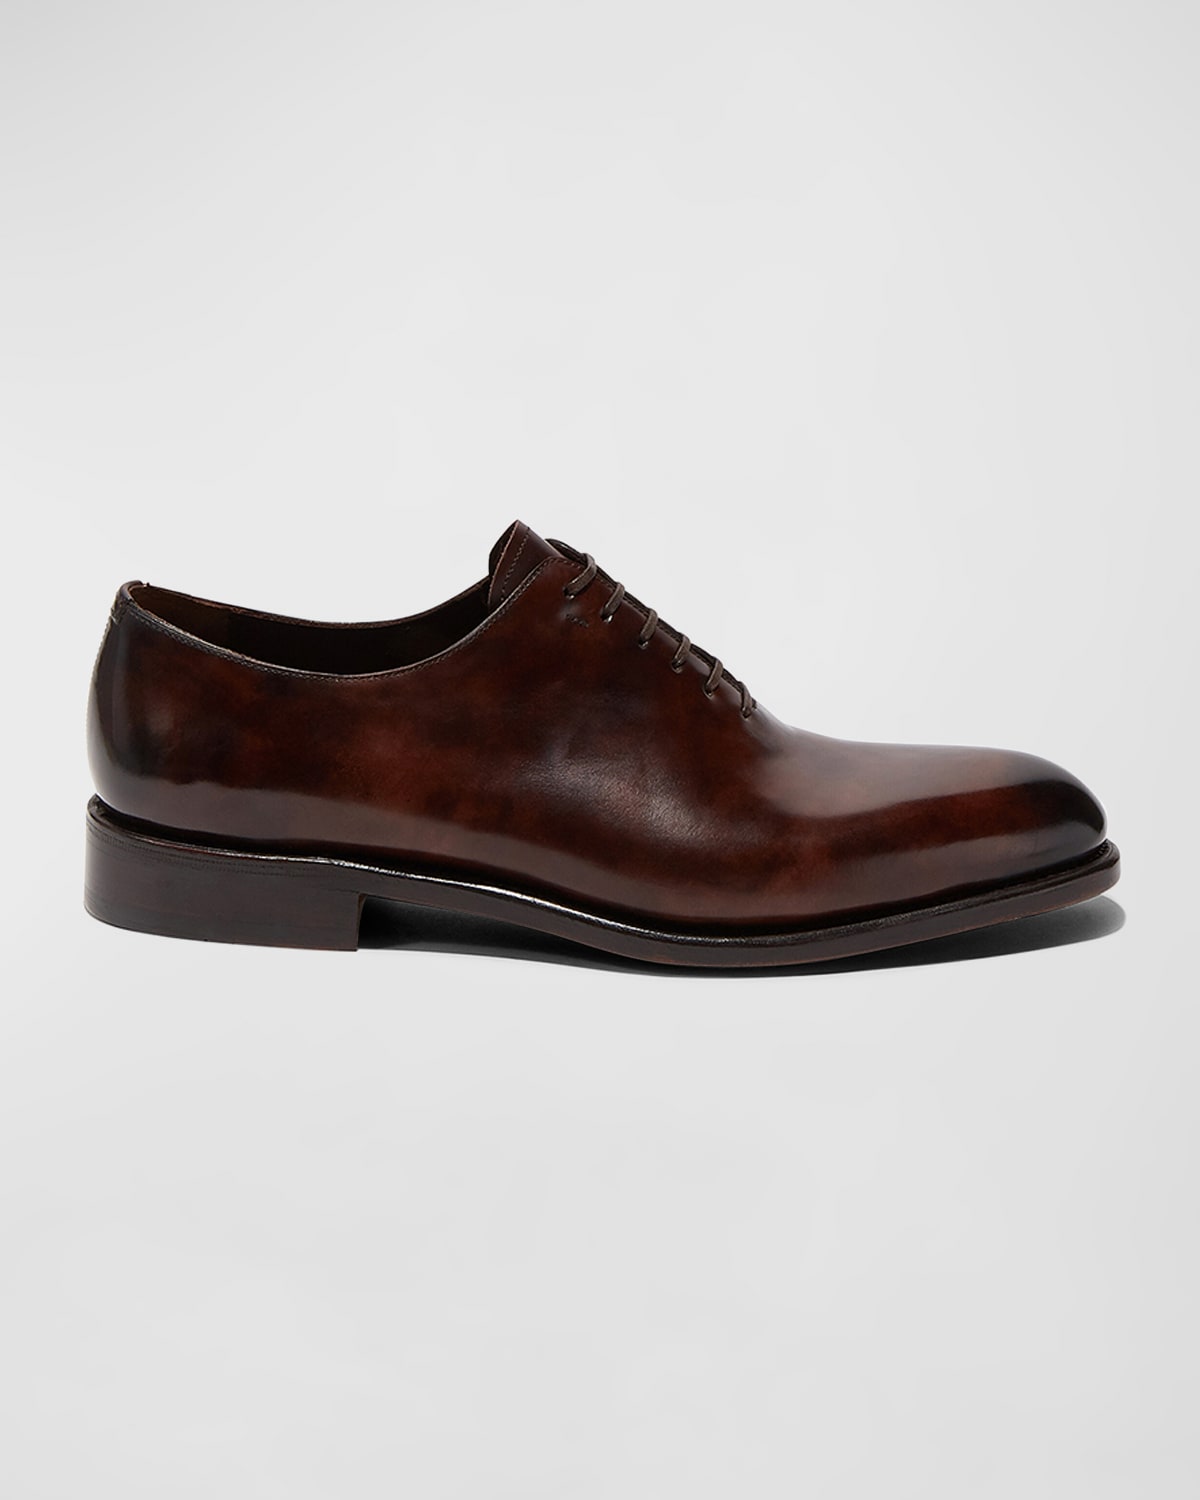 Men's Angiolo Tramezza Whole-Cut Leather Lace-Up Shoes